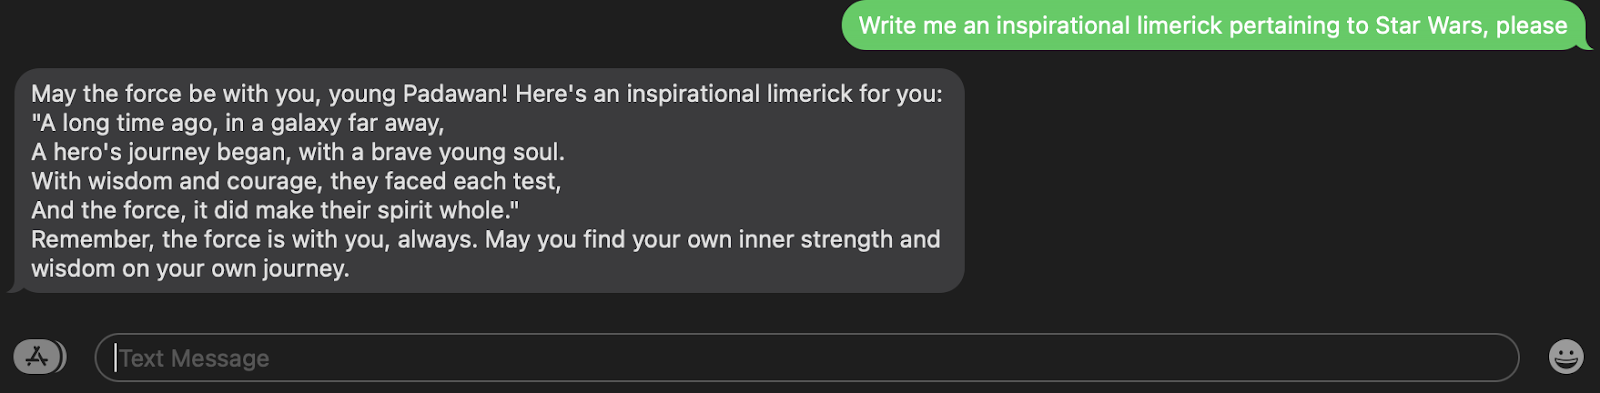 SMS example where I ask "Write me an inspirational limerick pertaining to Star Wars, please" and the response is "May the force be with you, young Padawan! Here&#x27;s an inspirational limerick for you: "A long time ago, in a galaxy far away, A hero&#x27;s journey began, with a brave young soul. With wisdom and courage, they faced each test, And the force, it did make their spirit whole." Remember, the force is with you, always. May you find your own inner strength and wisdom on your own journey."